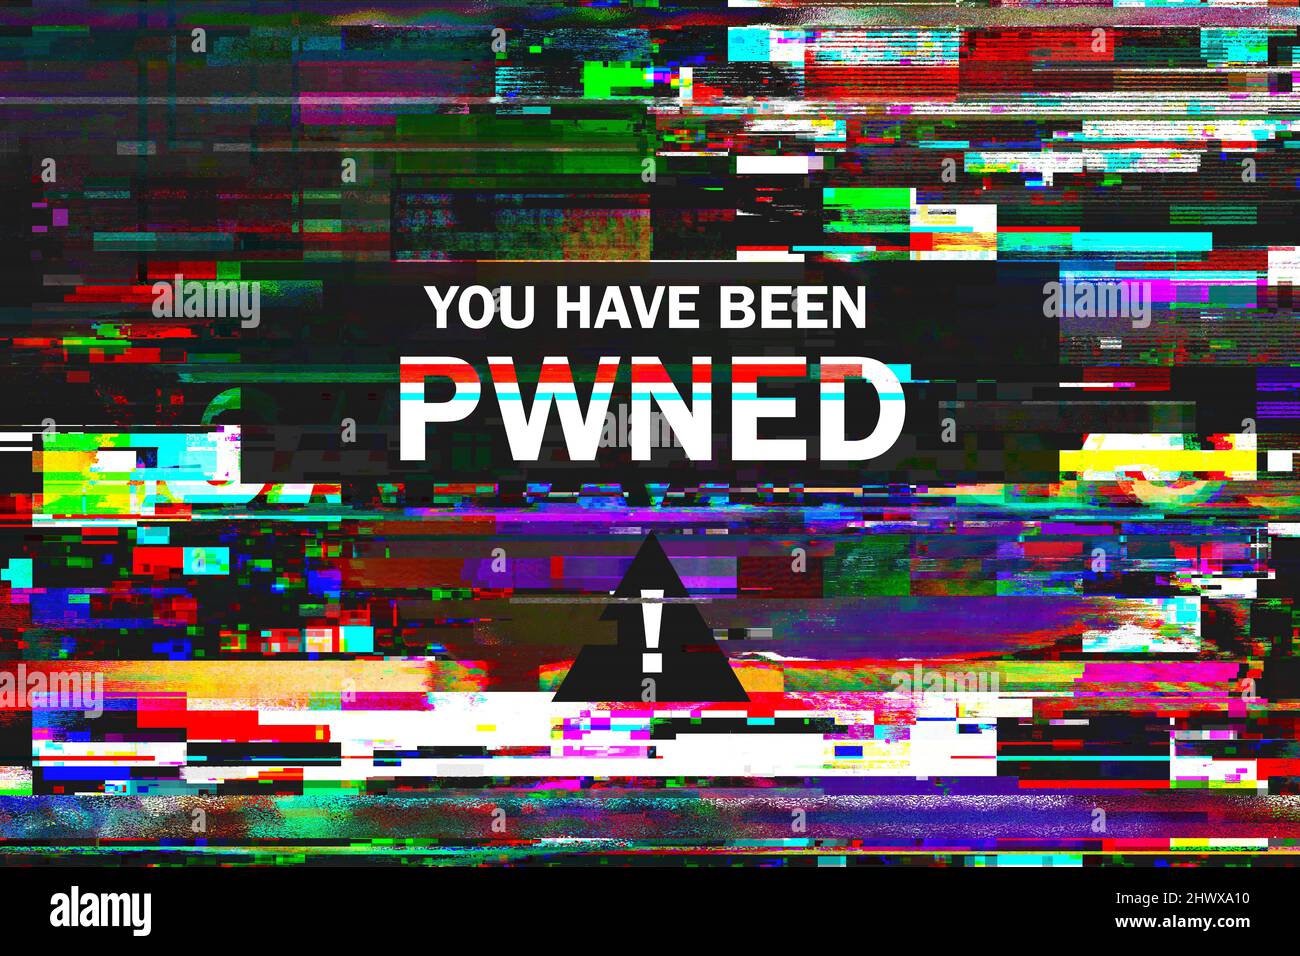 You have been PWNED message on hacked computer screen with glitch effect, modern 2d illustration Stock Photo